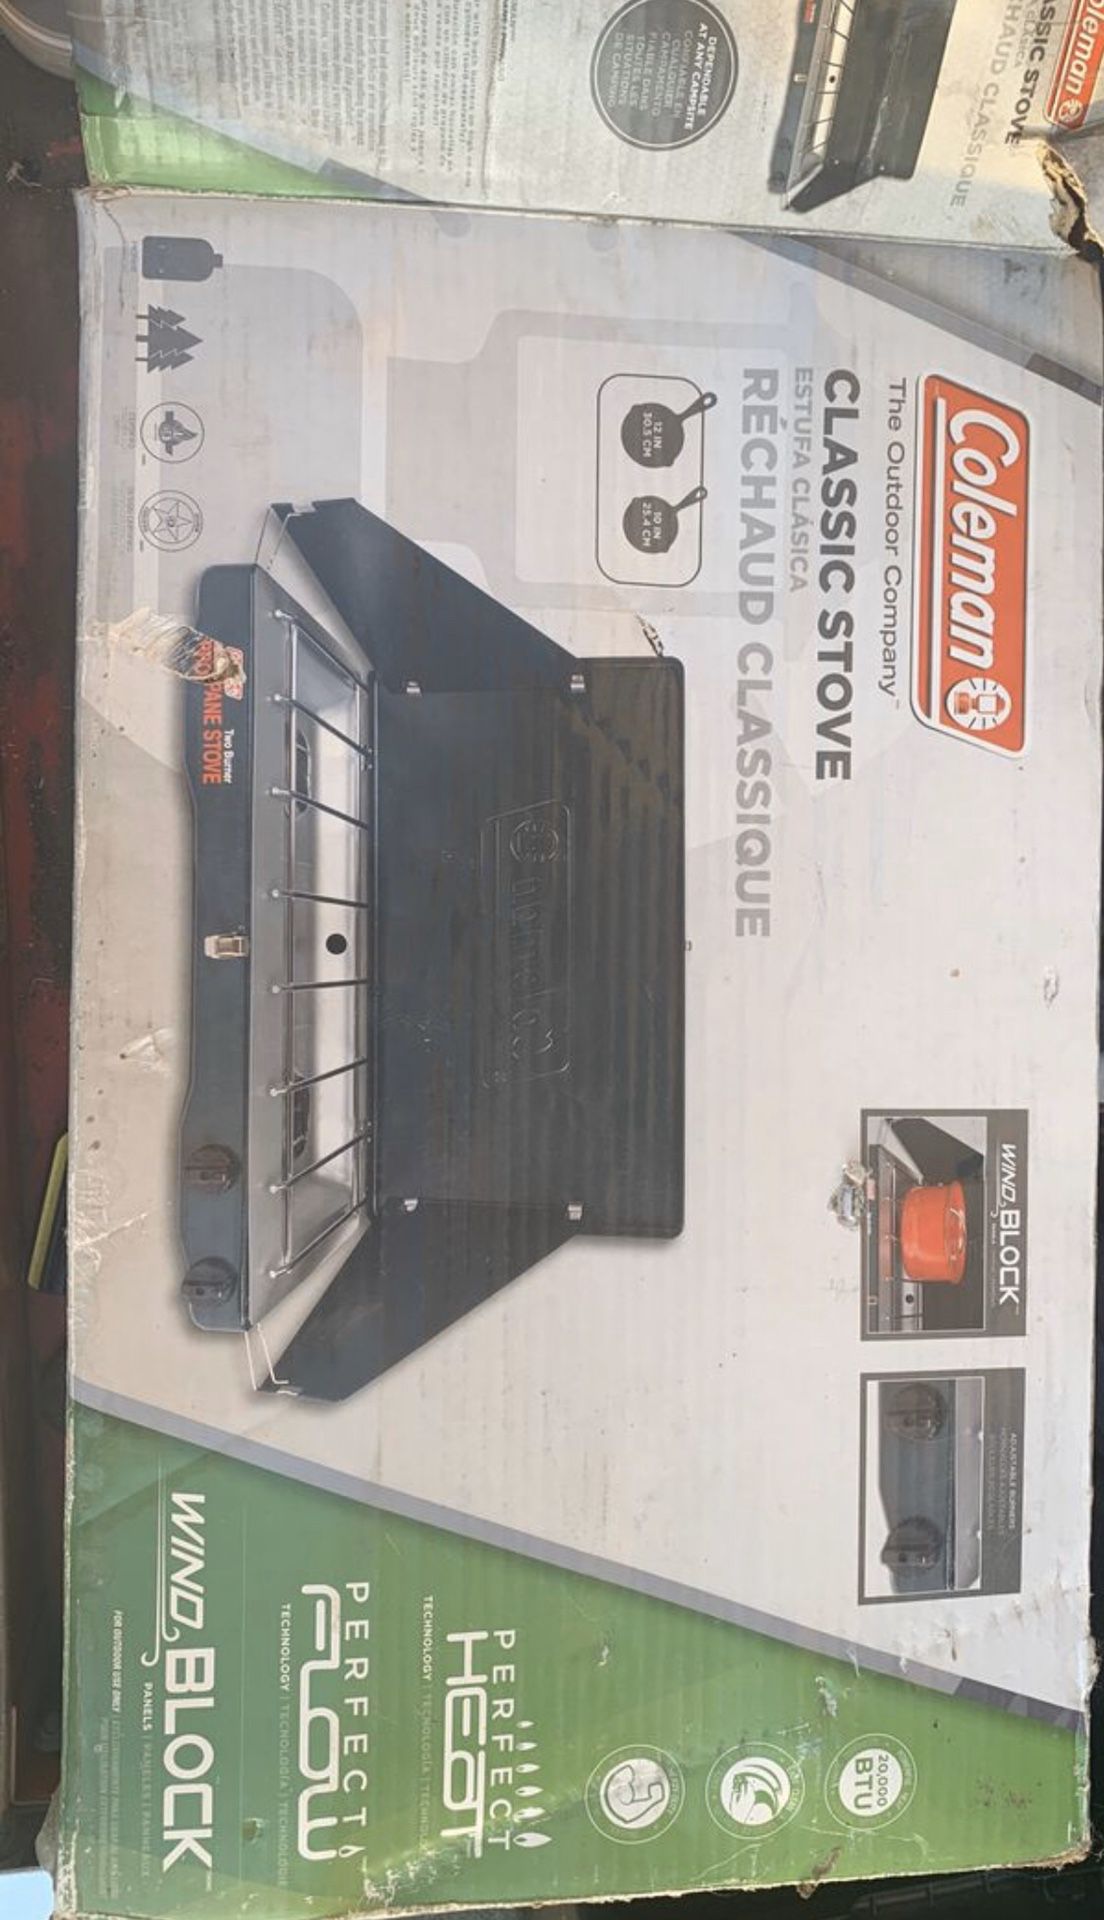 Coleman Portable propane gas classic stove with 2 burners